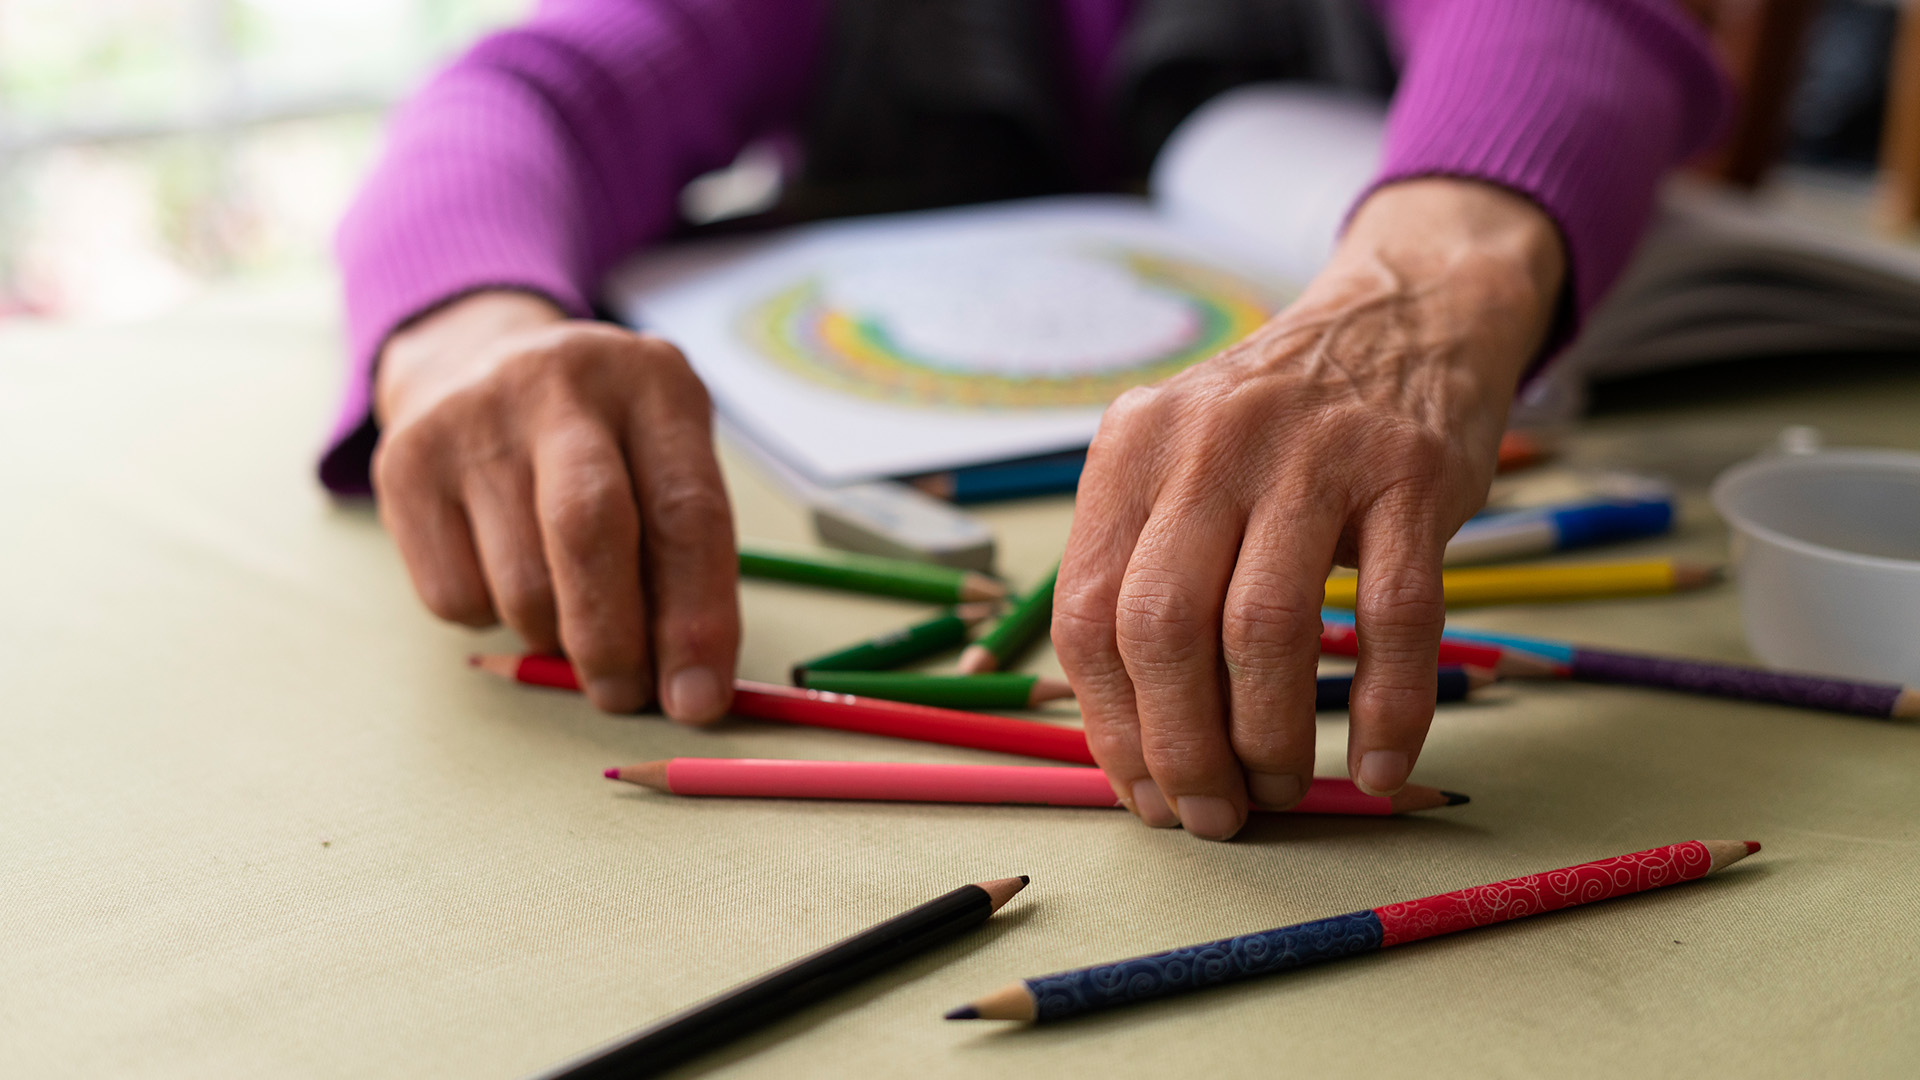 senior hands reaching for colored pencils to draw